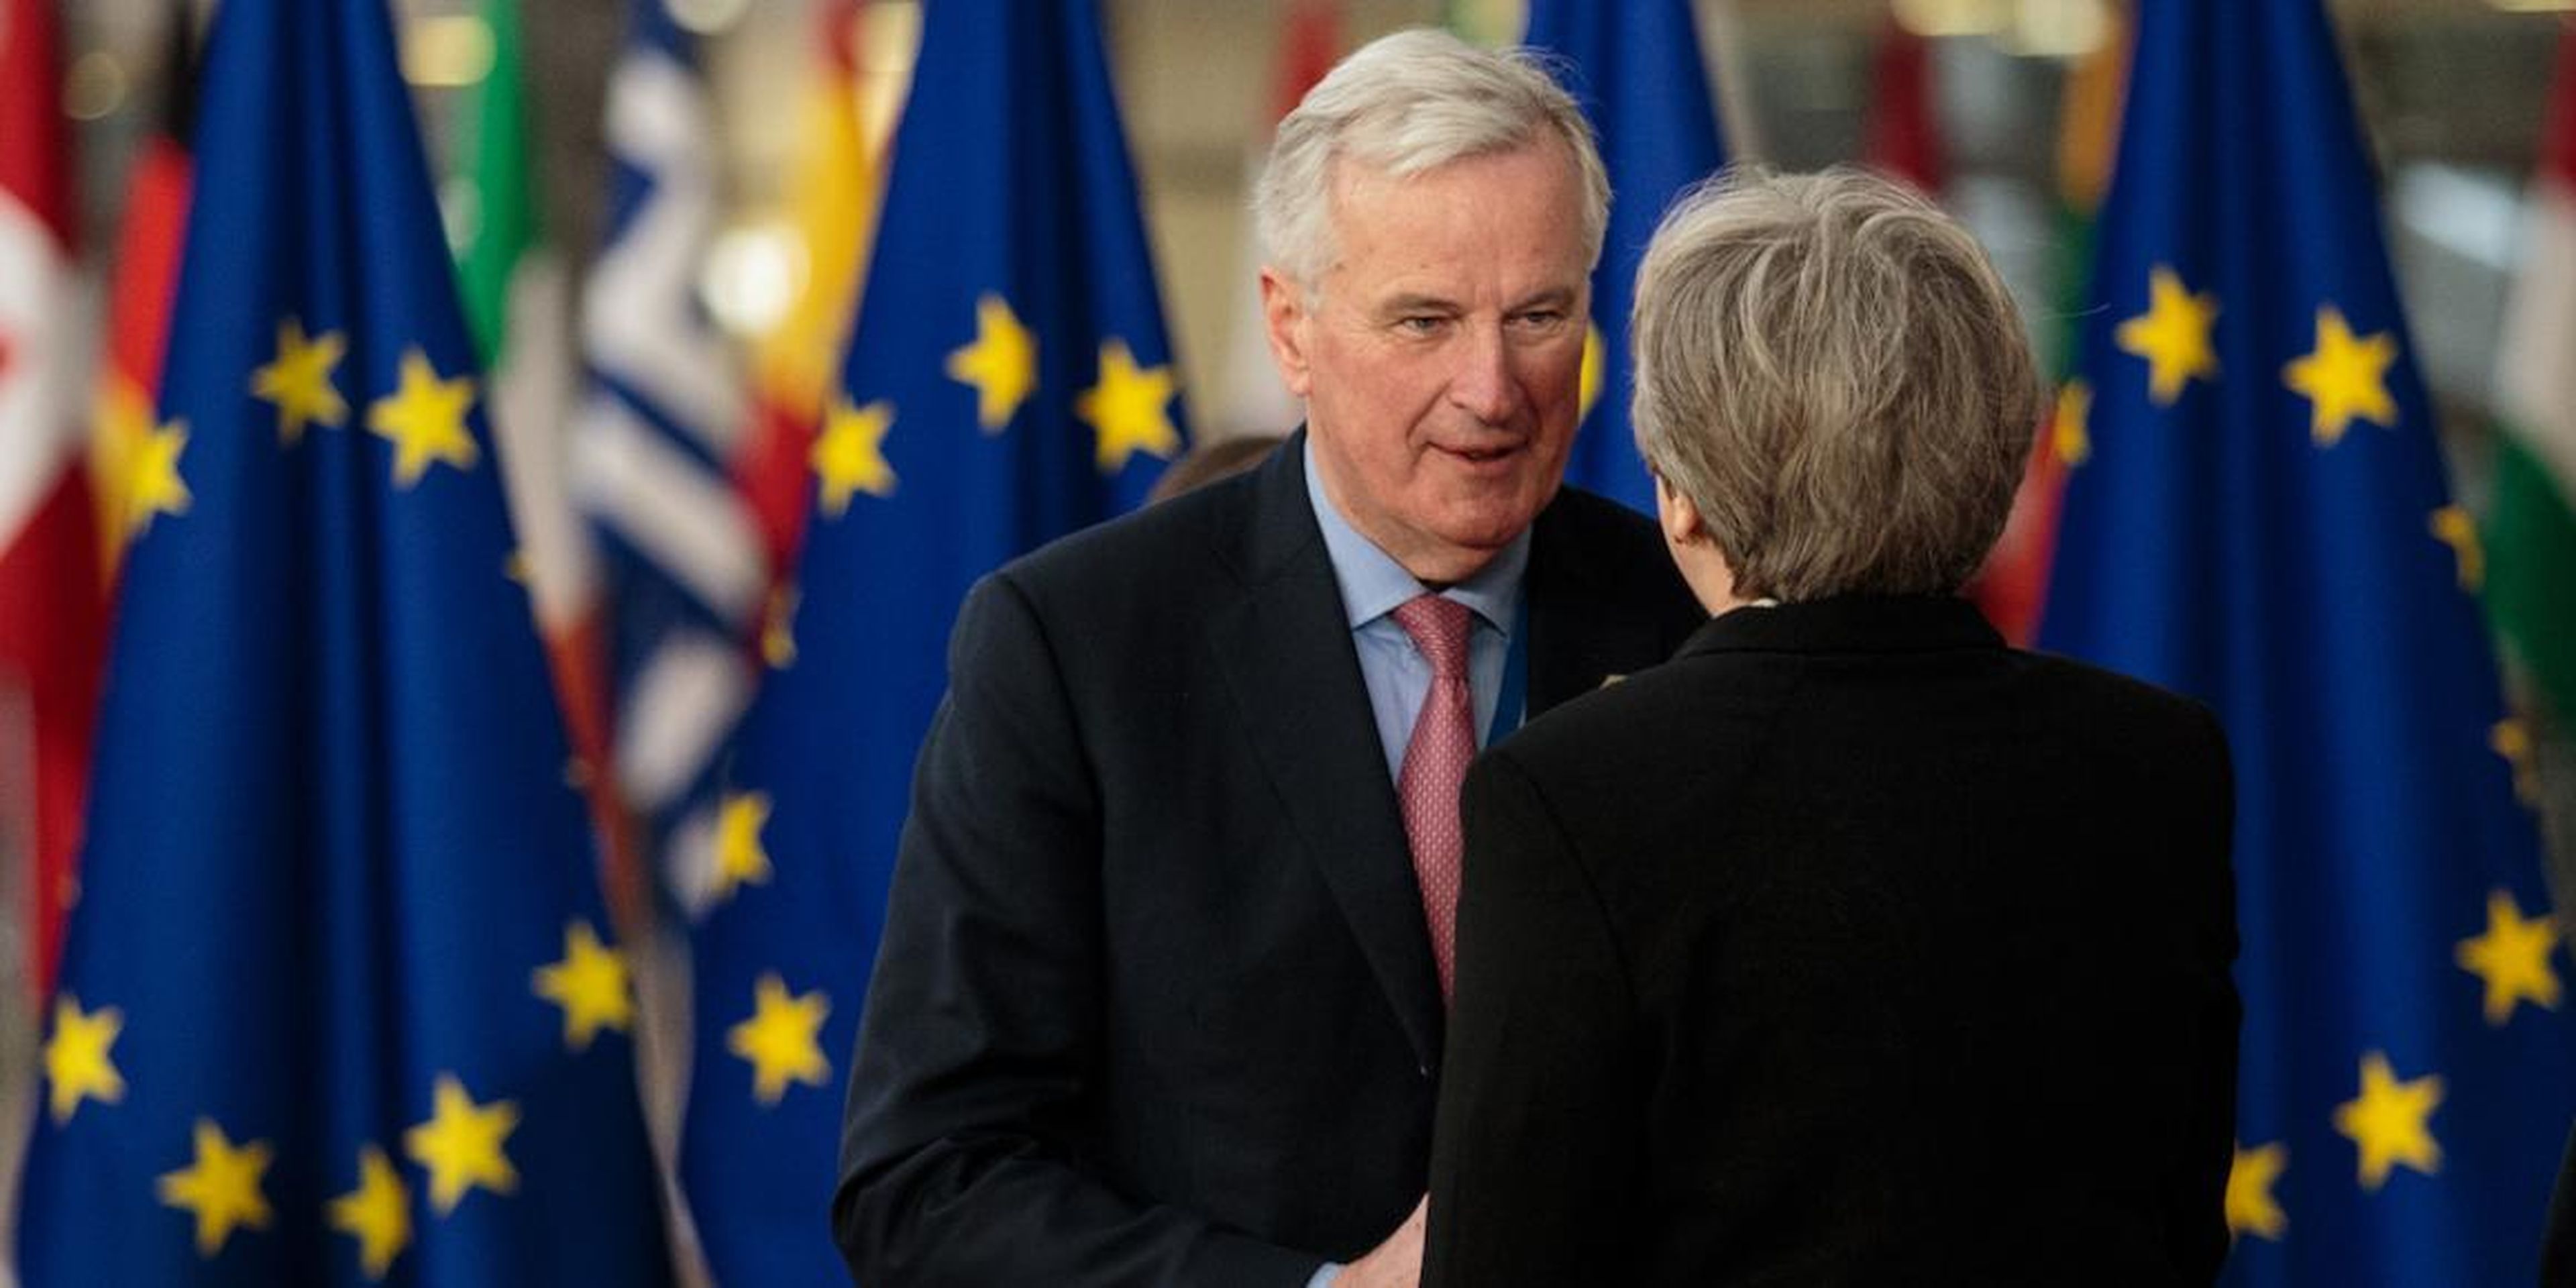 The EU's chief Brexit negotiator Michel Barnier meeting with Theresa May.